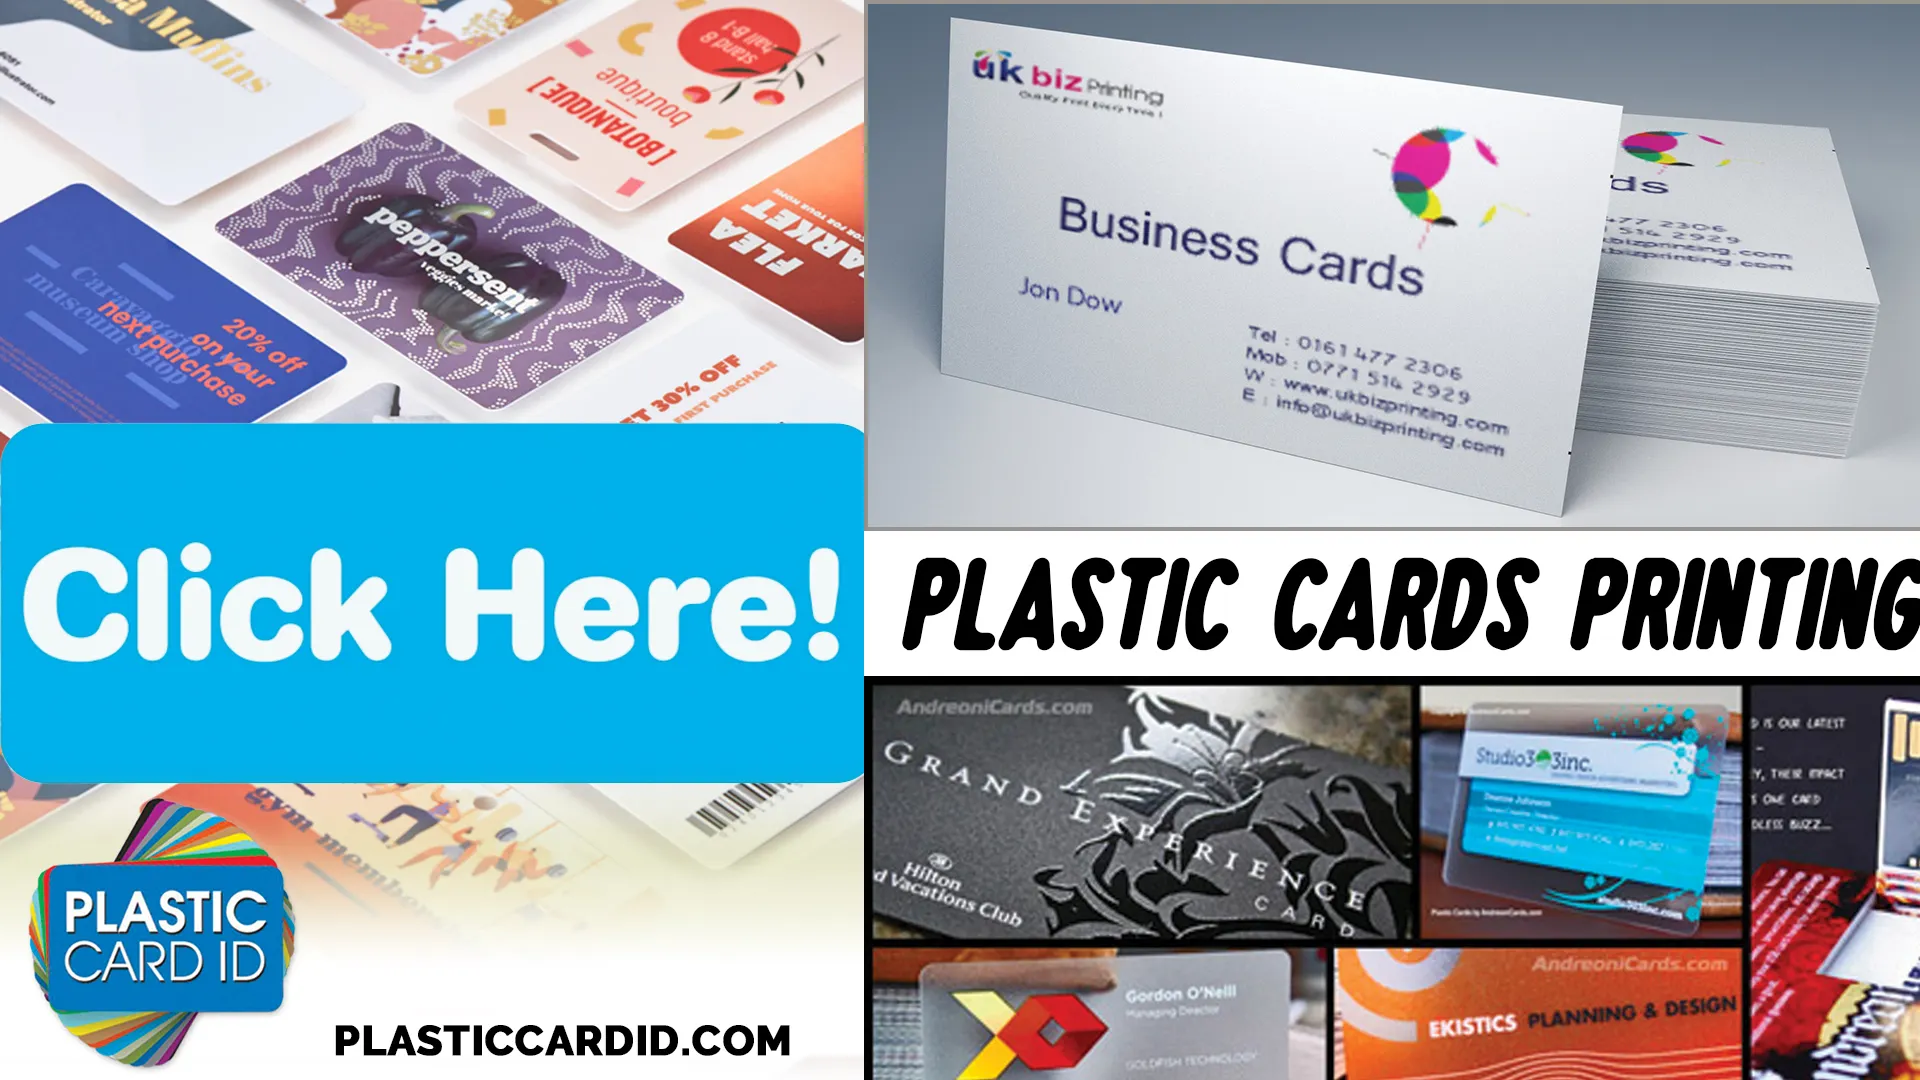 Welcome to Plastic Card ID




: Your Partner in Superior Card Production